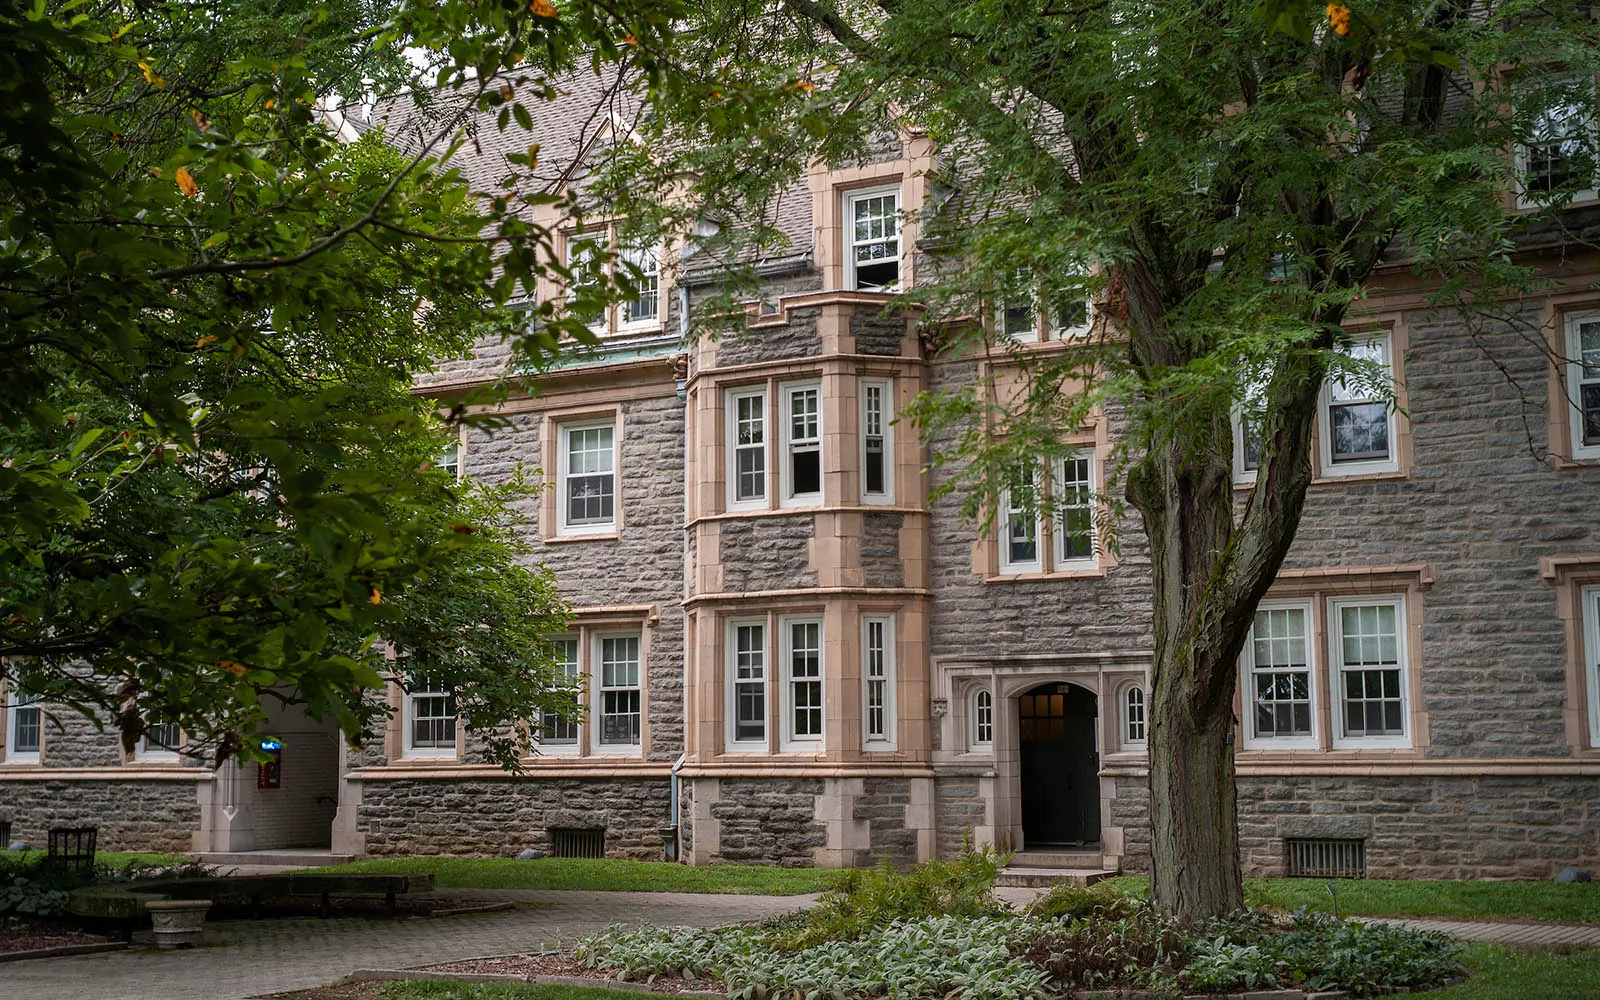 Exterior shot of Wharton Hall with trees in foreground